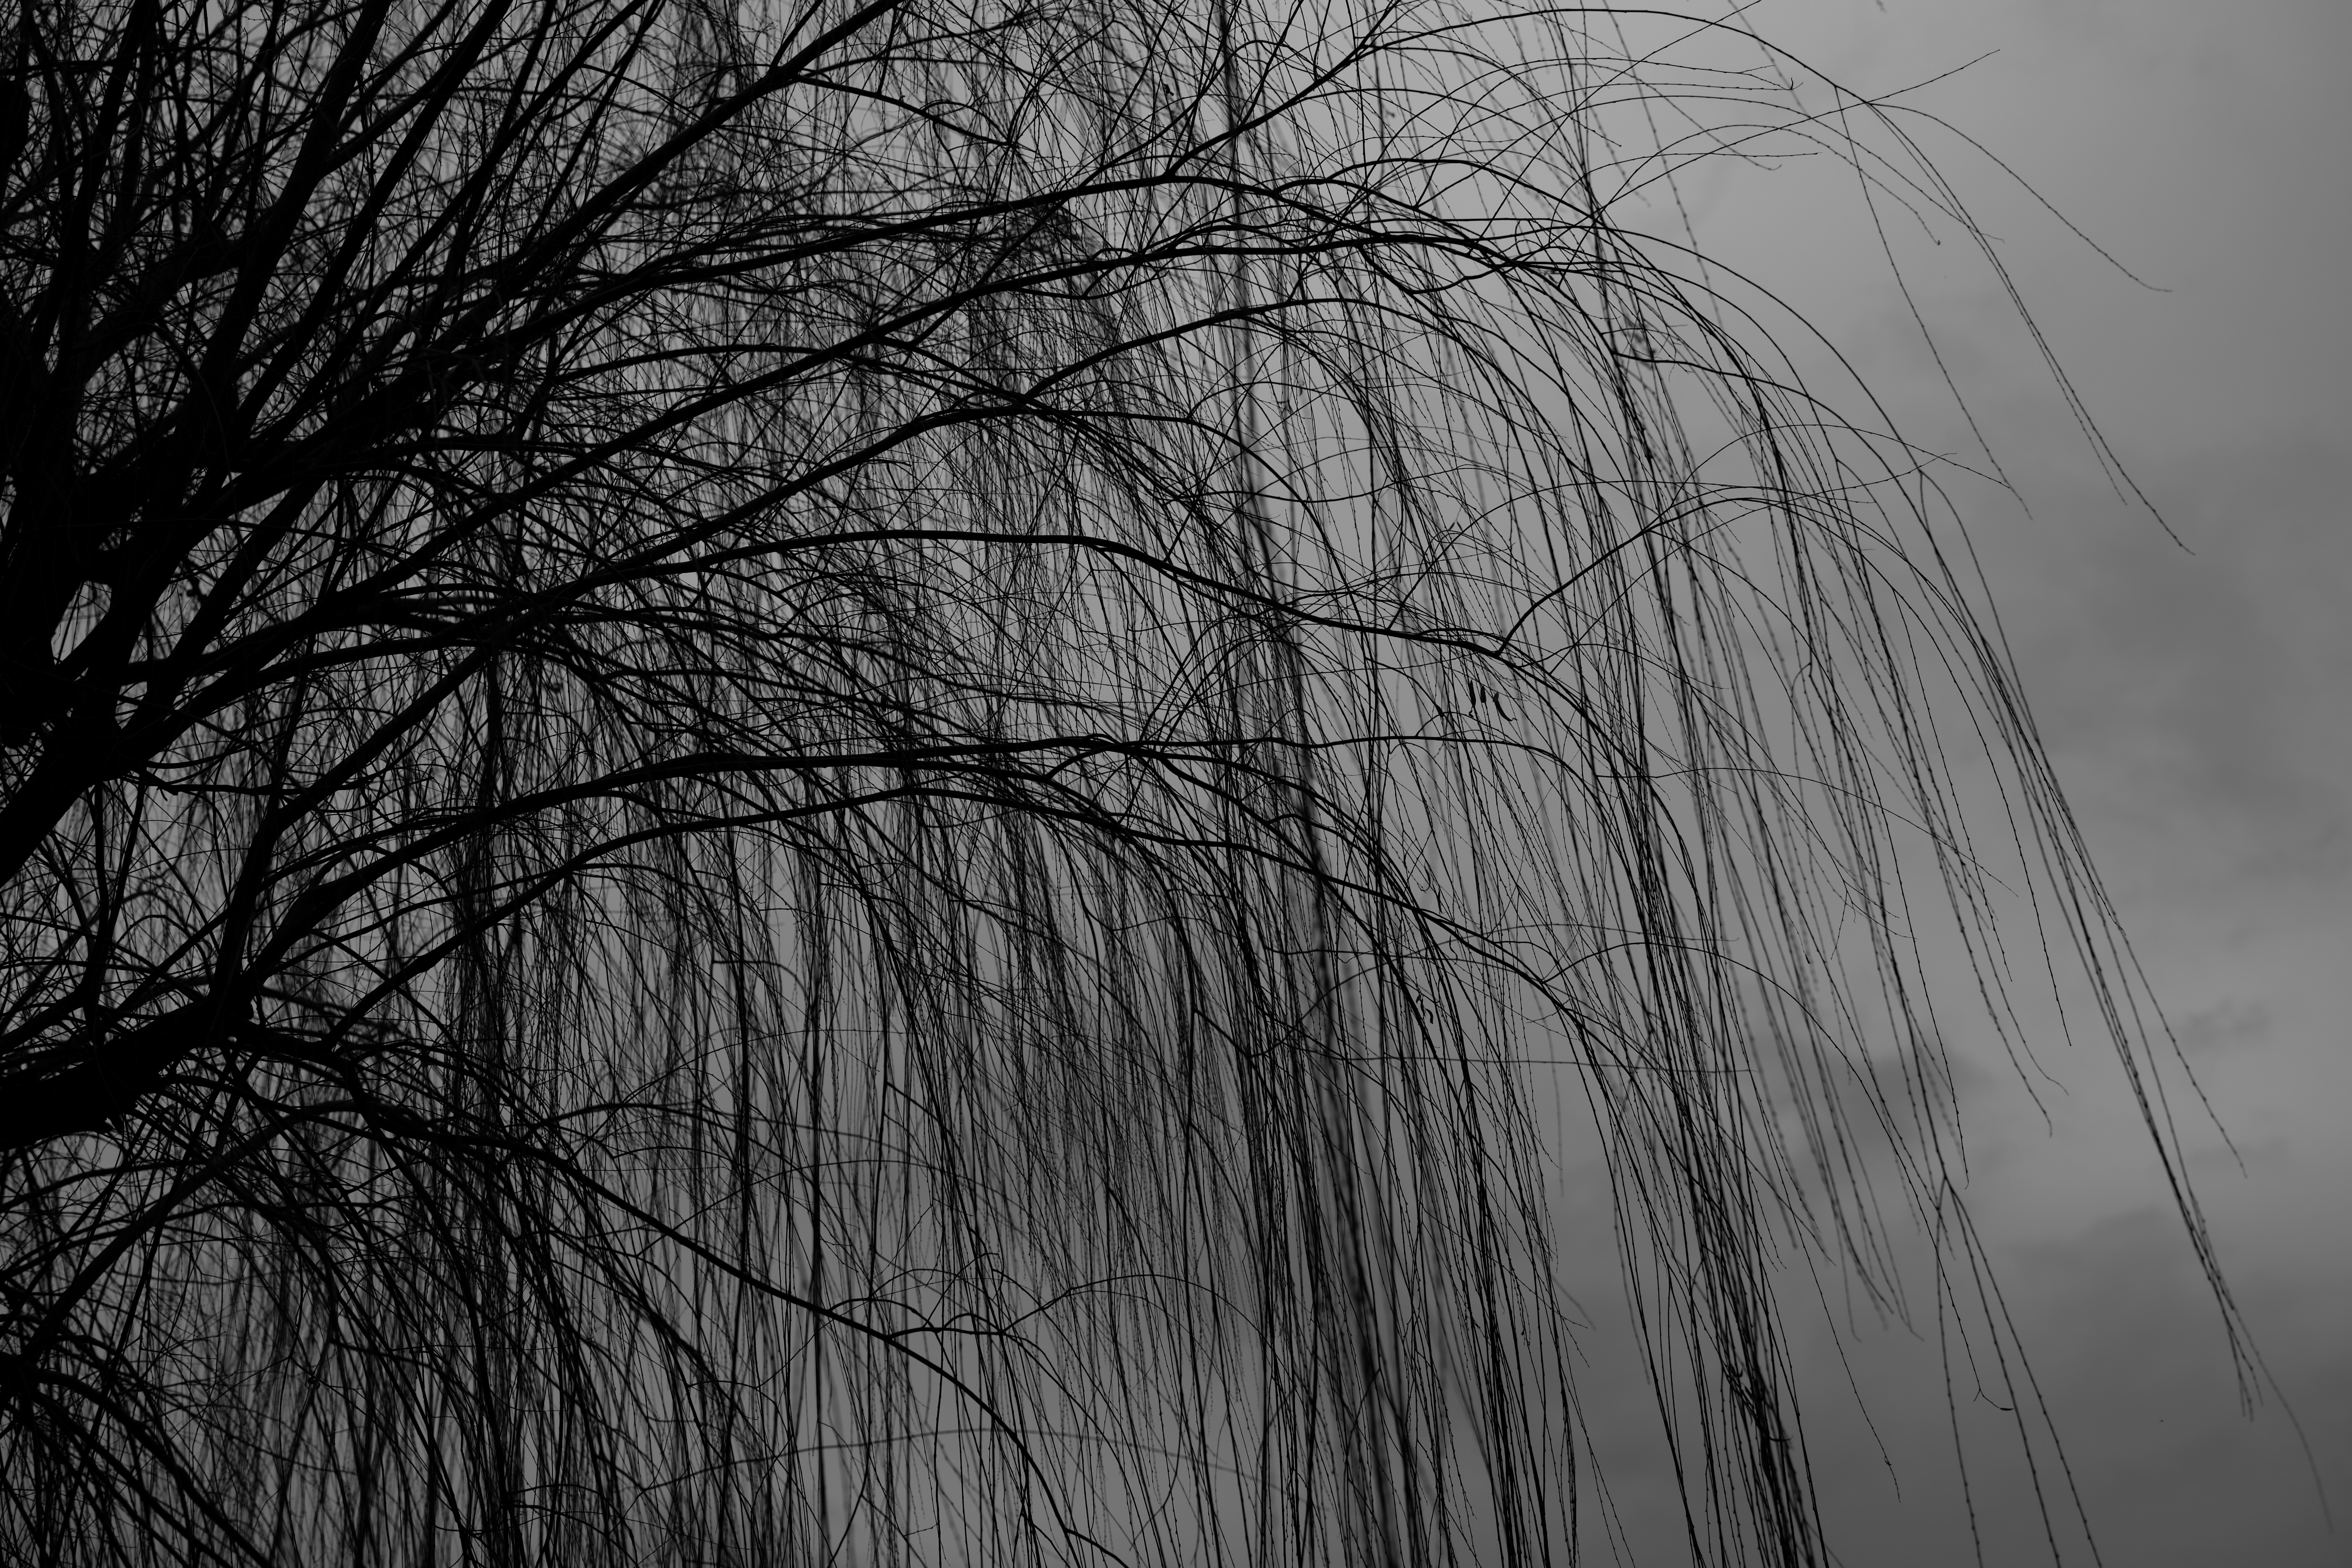 dark, wood, tree, branches, bw, chb, willow